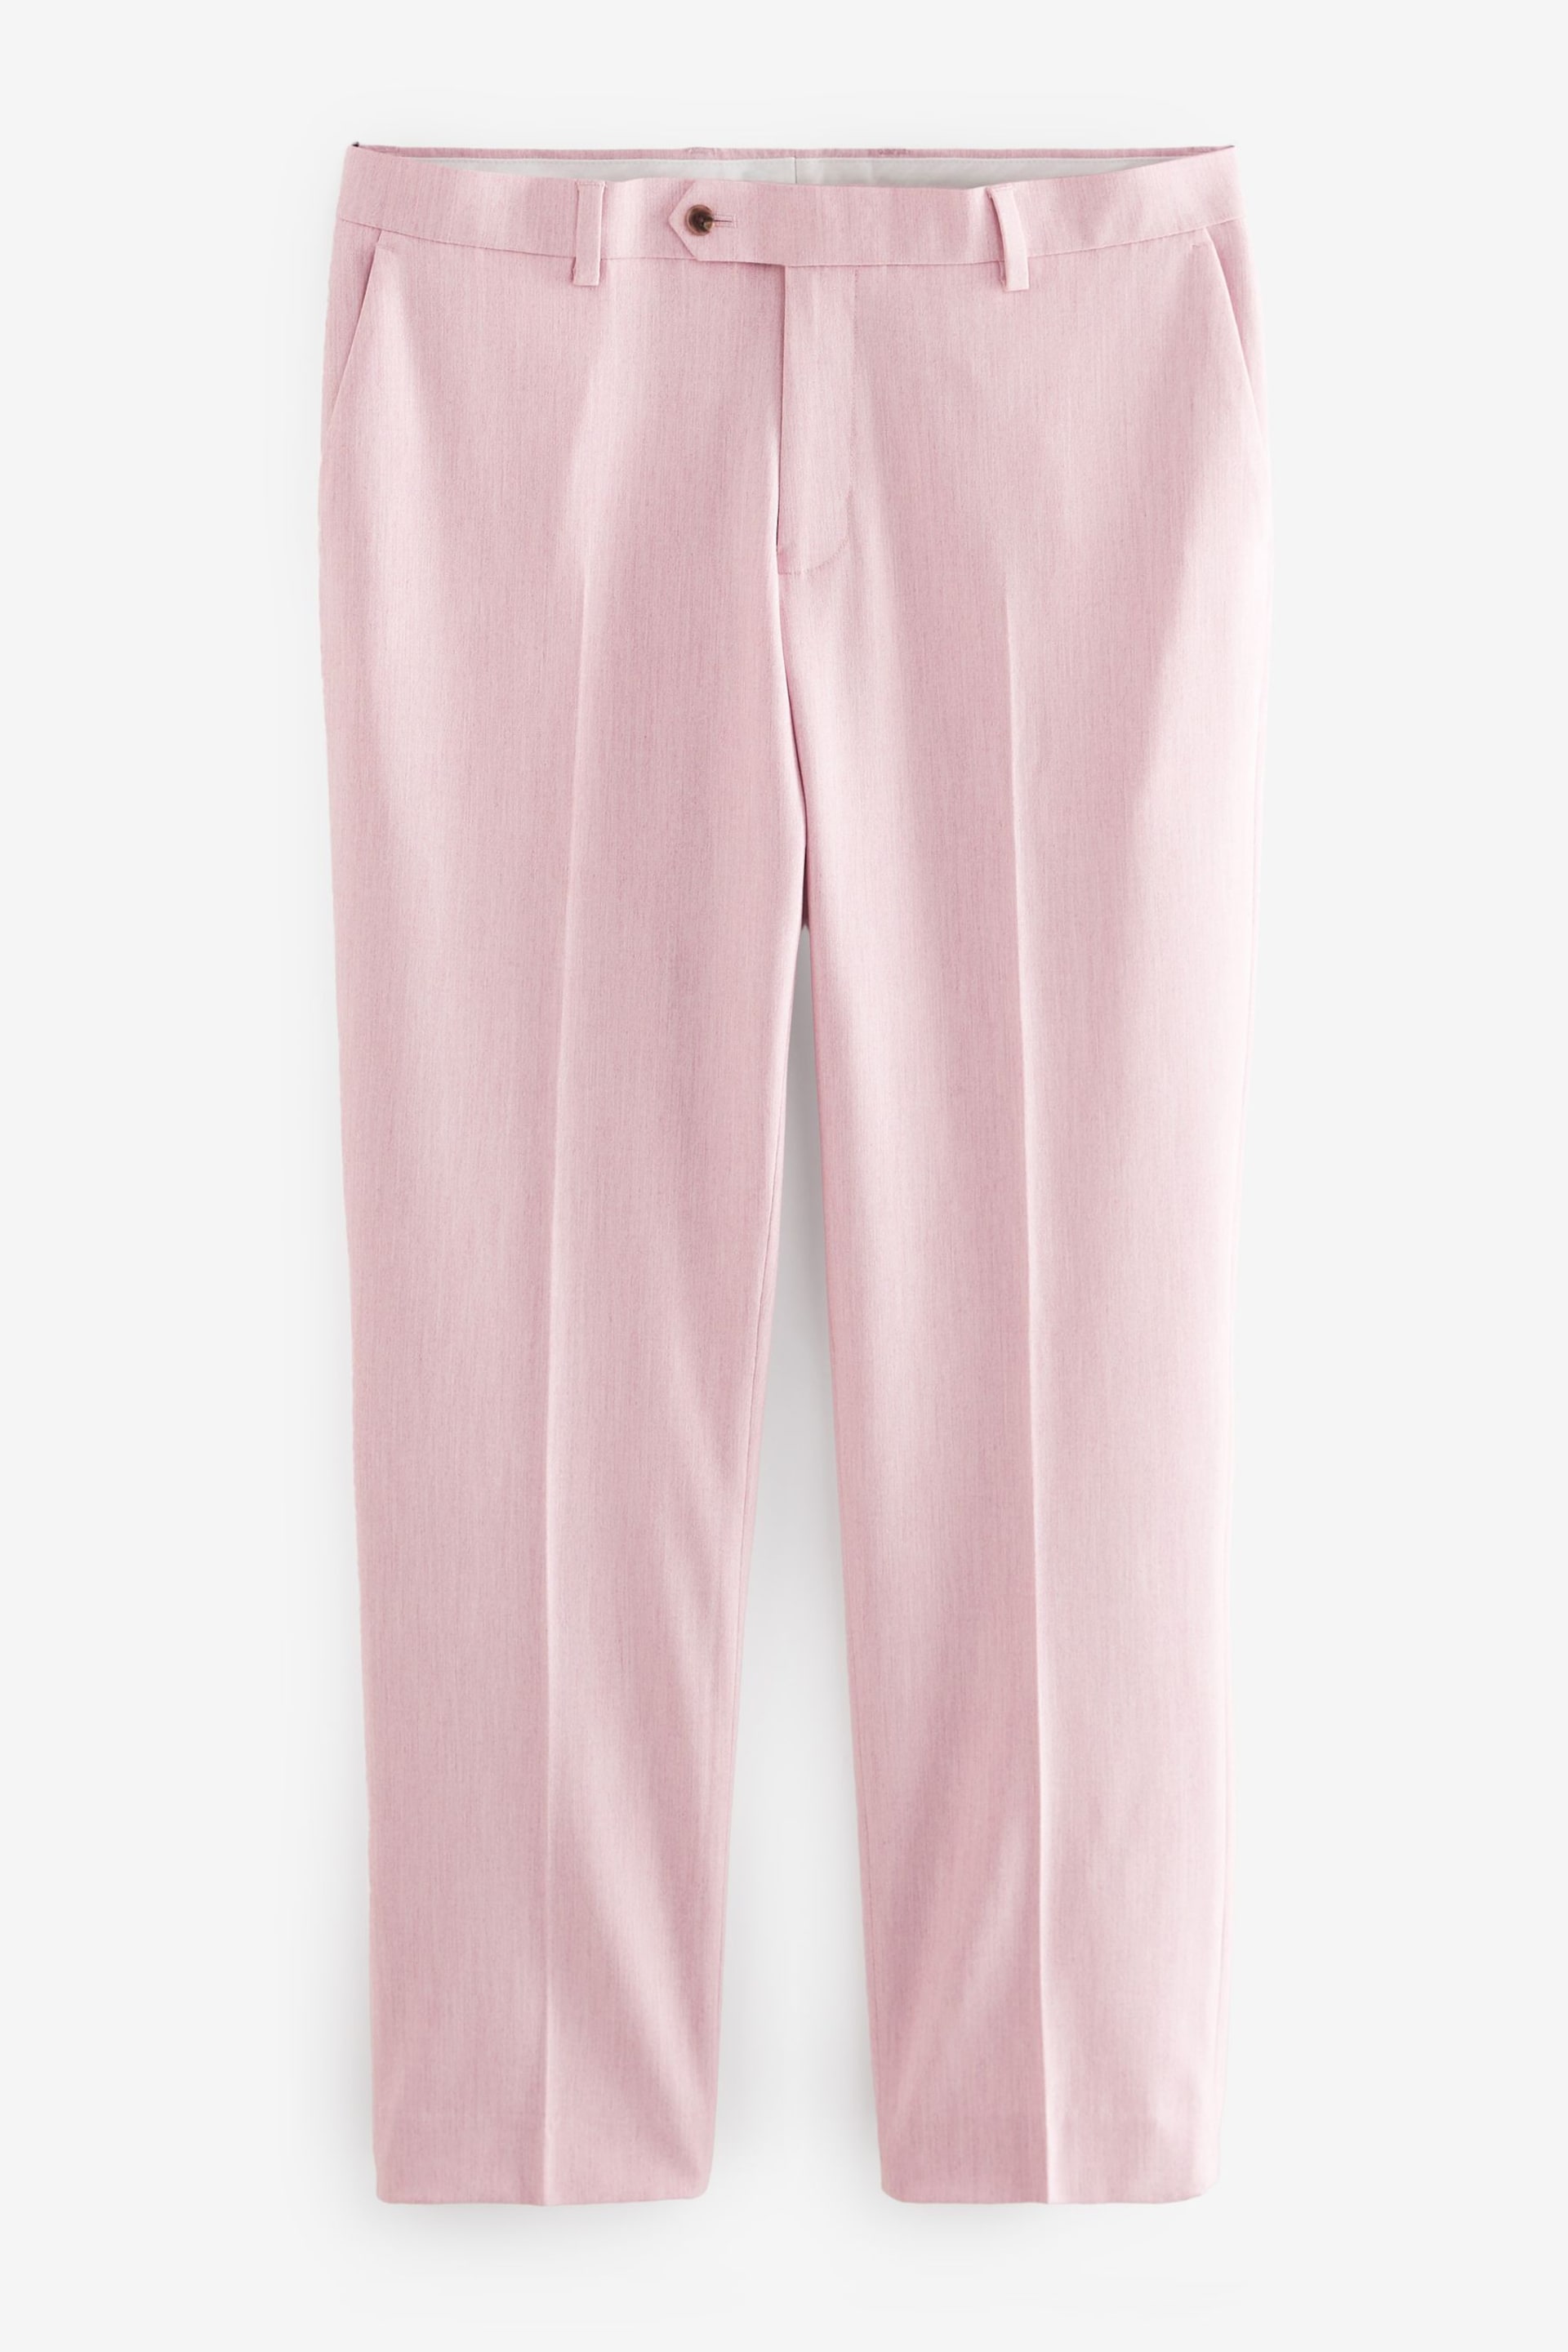 Pink Regular Fit Motionflex Stretch Suit: Trousers - Image 6 of 9